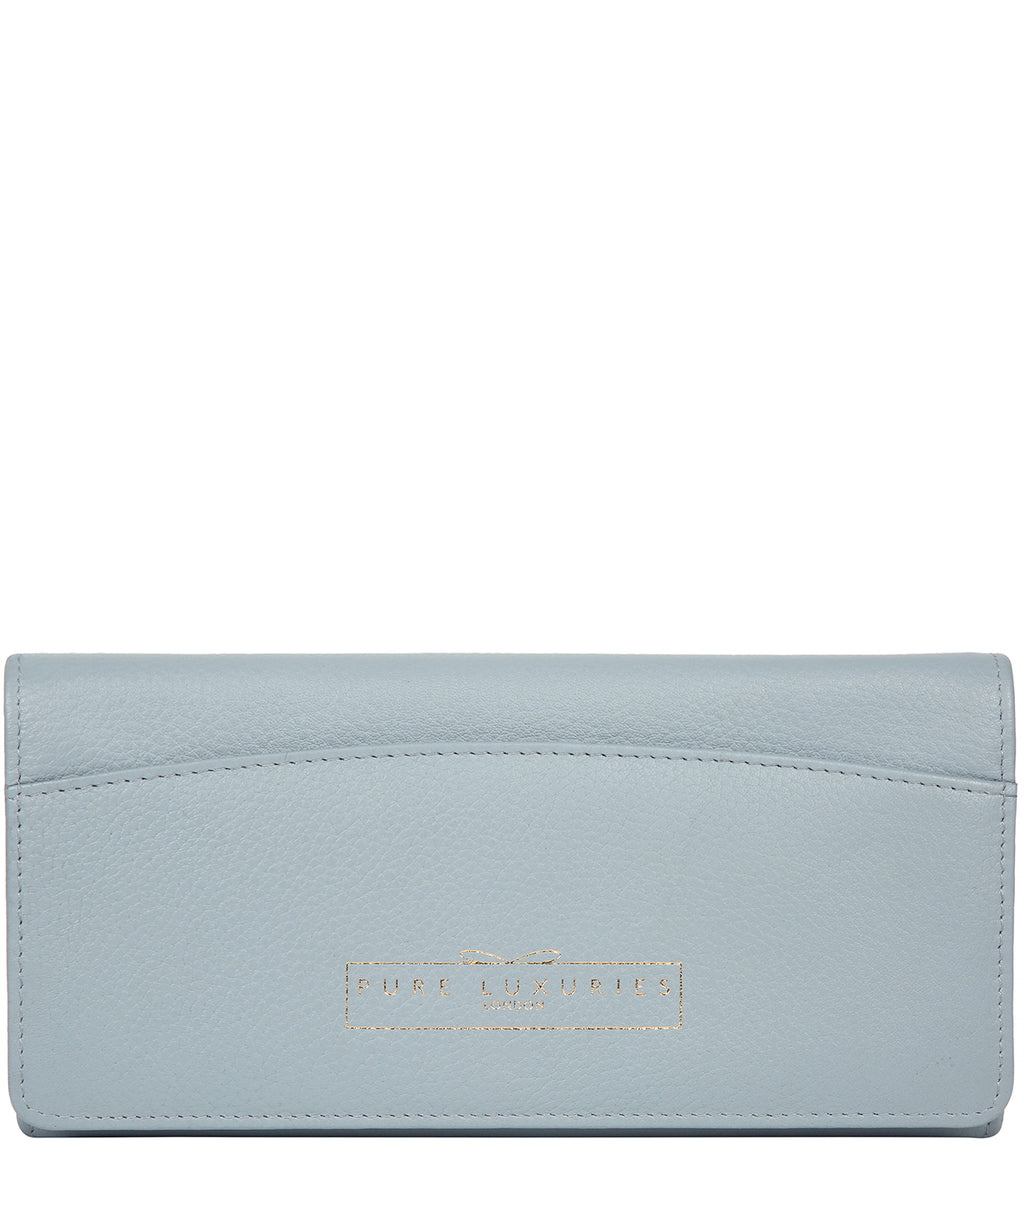 Blue Leather Purse 'Izabel' by Pure Luxuries – Pure Luxuries London